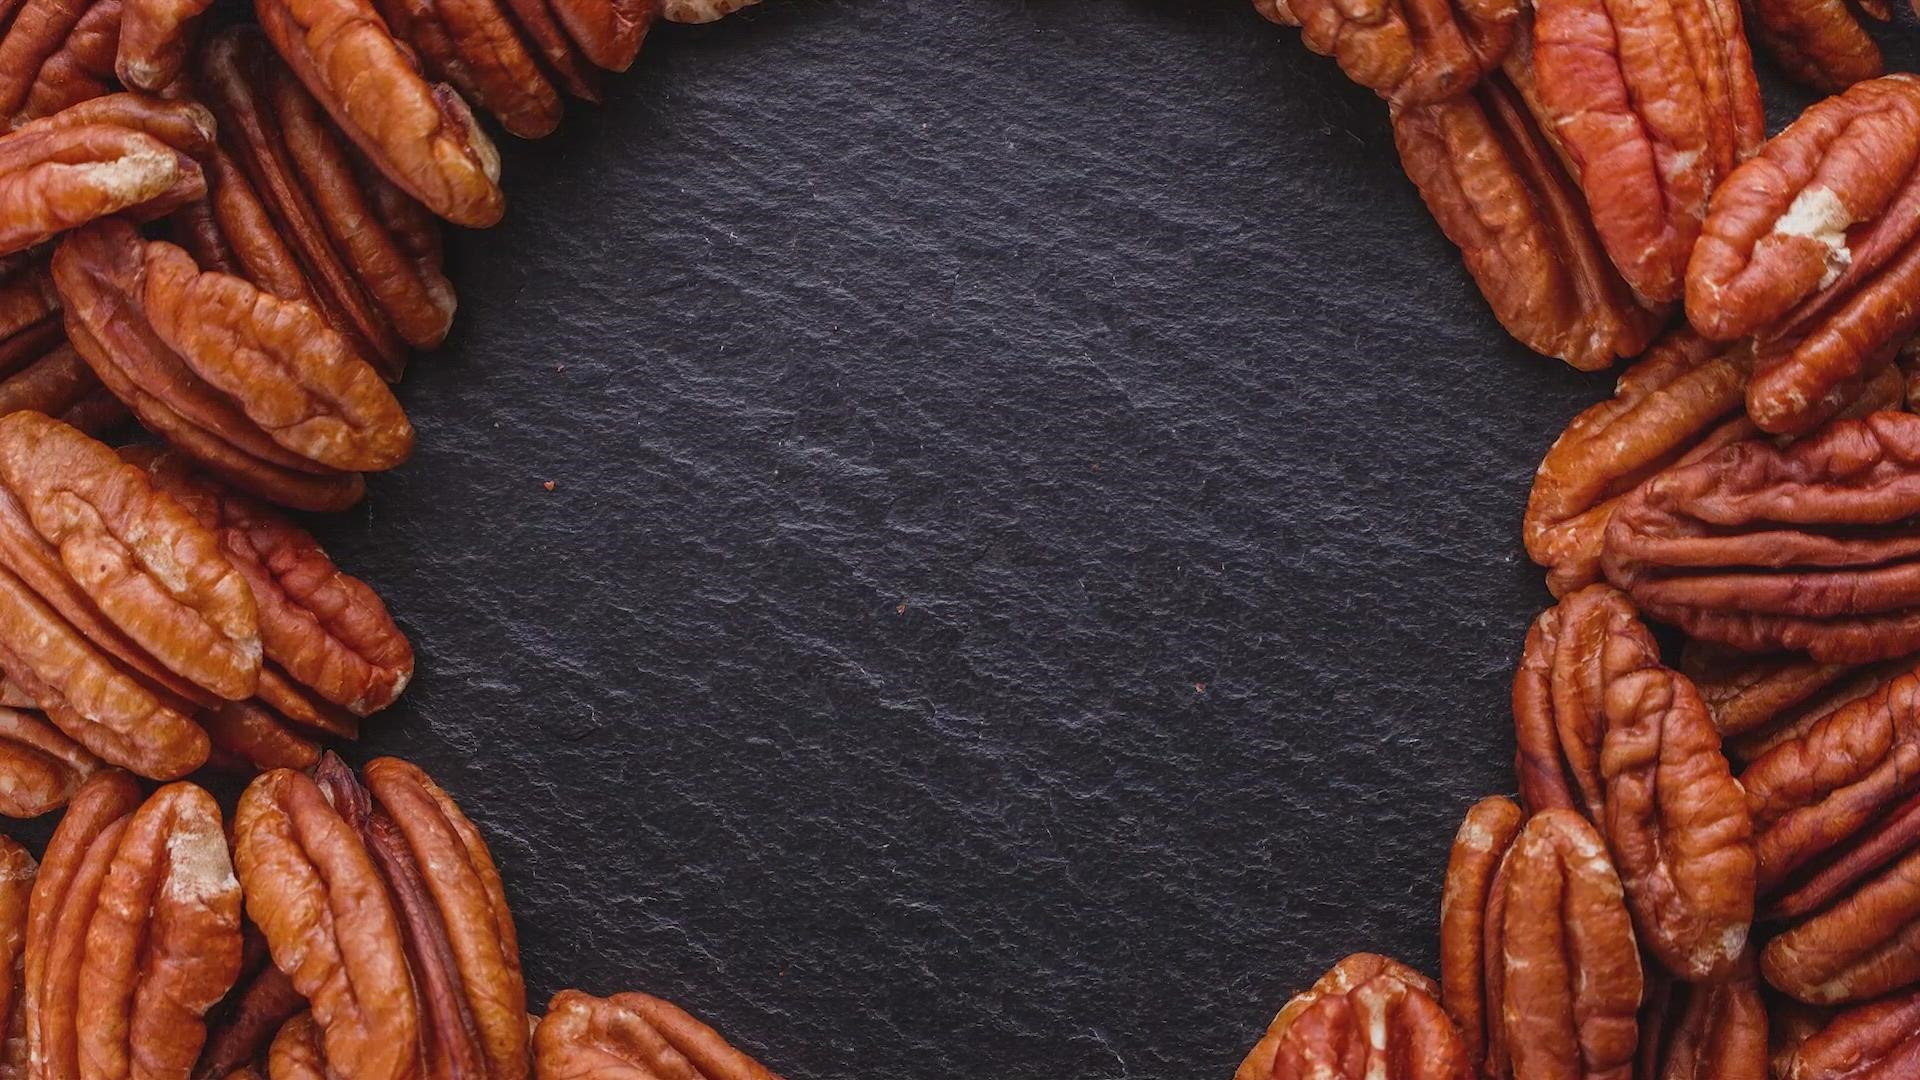 From "puh-KAHN" to "PEE-can," there are many ways people across the country pronounce the word pecan.